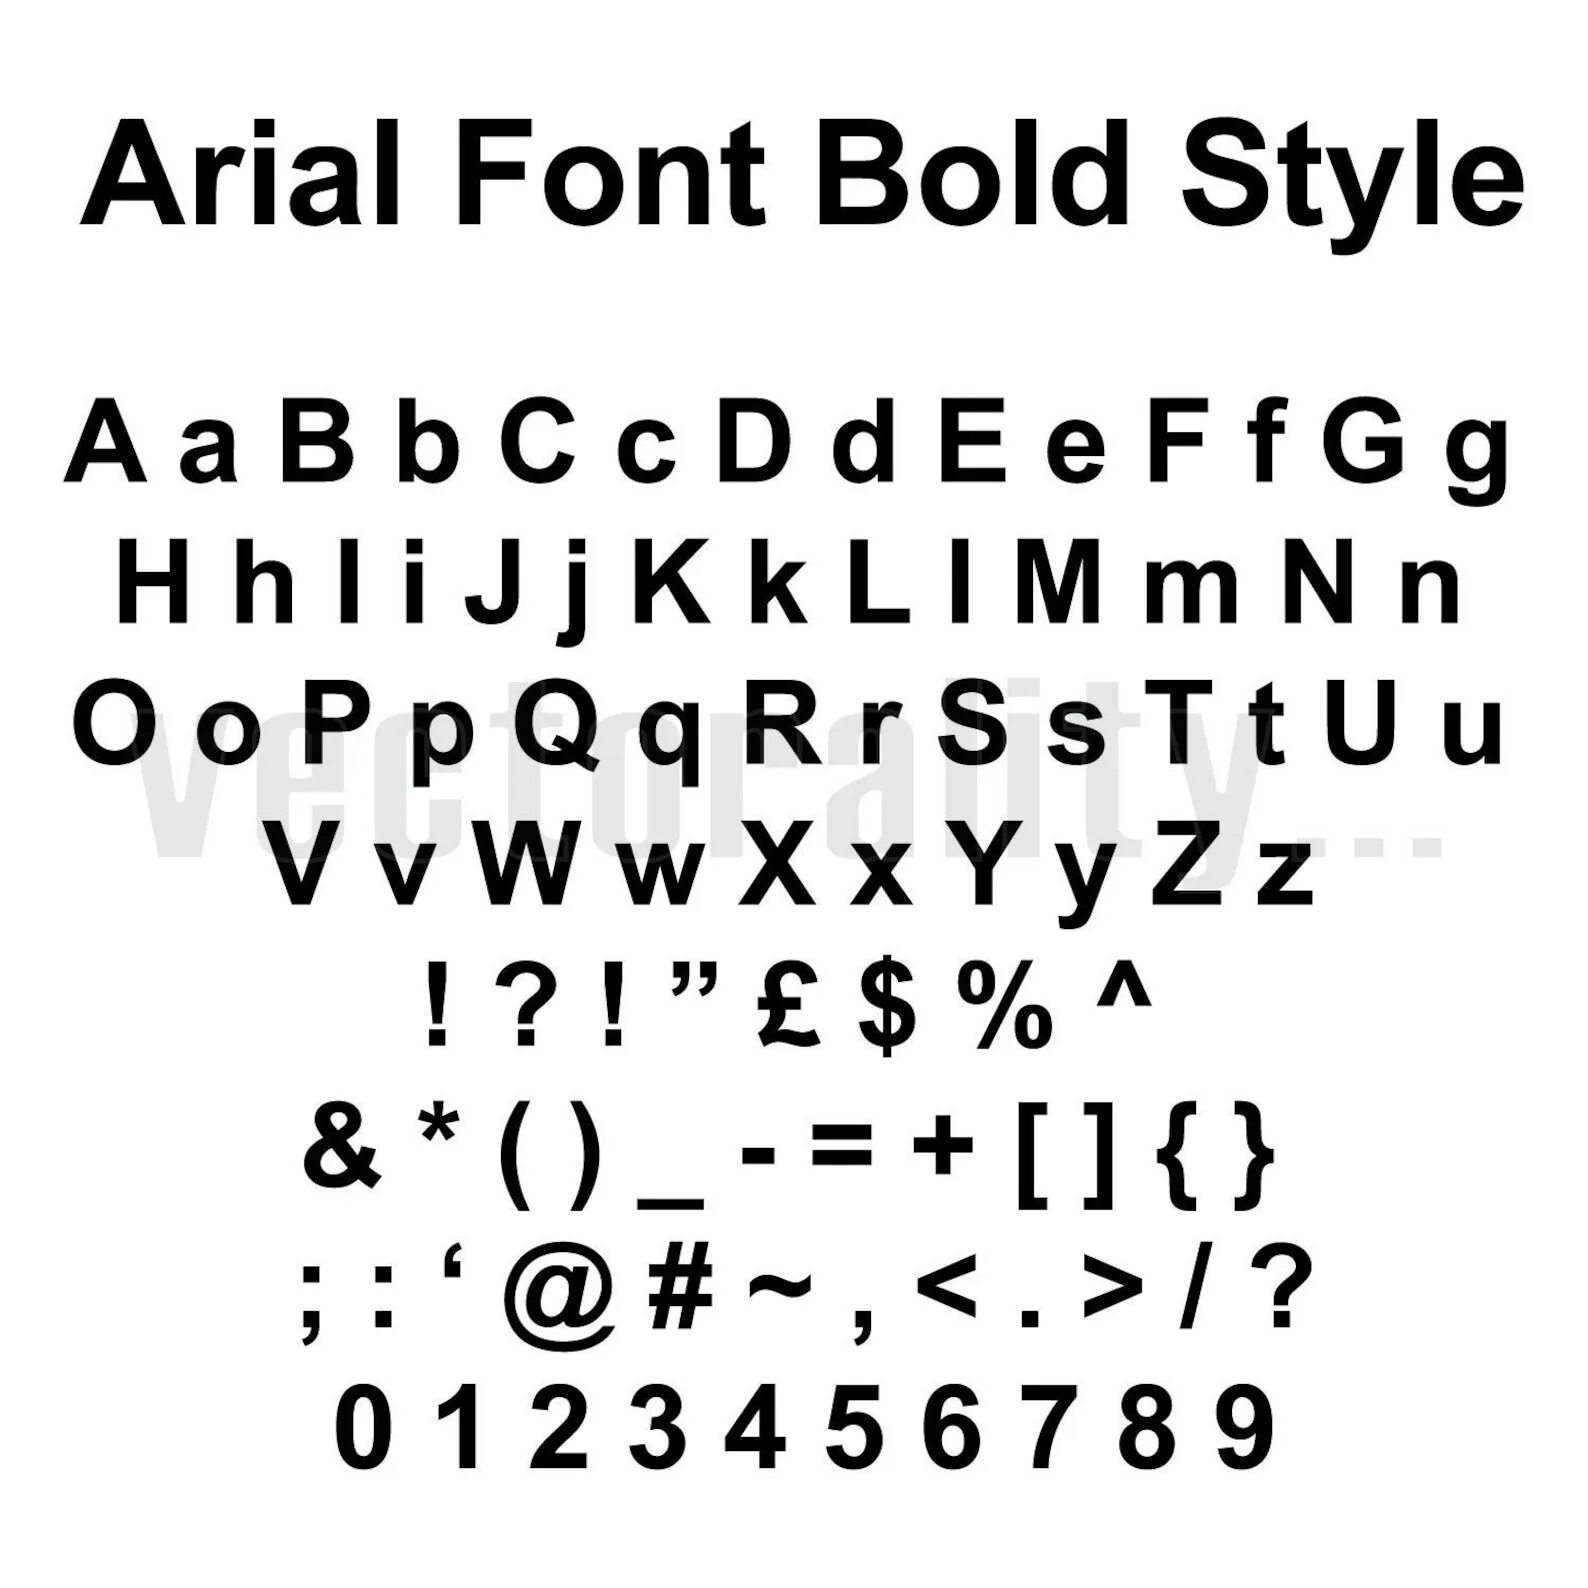 Шрифт arial 2. Arial шрифт. Шрифт arial Regular. Шрифт arial rounded. Полужирный шрифт arial.